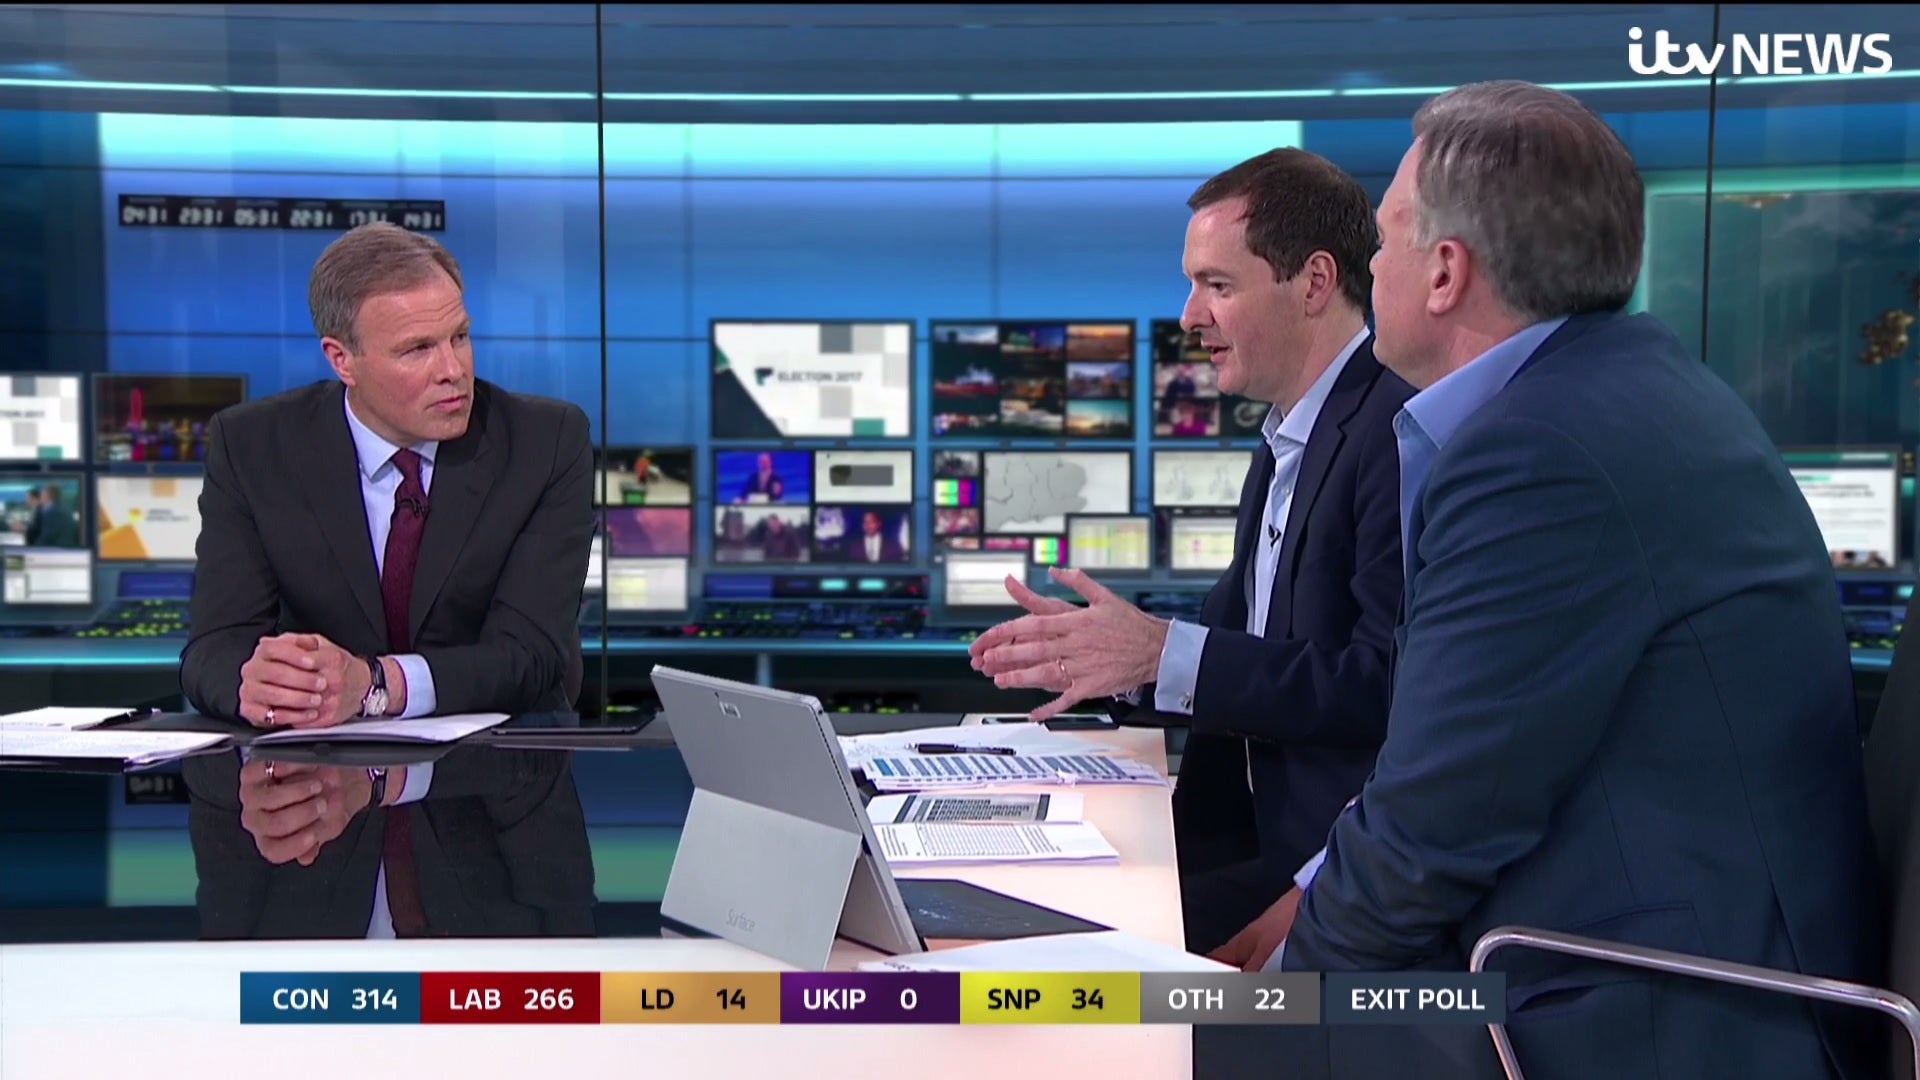 ITV and Osborne praised for election night coverage but BBC wins the ratings battle